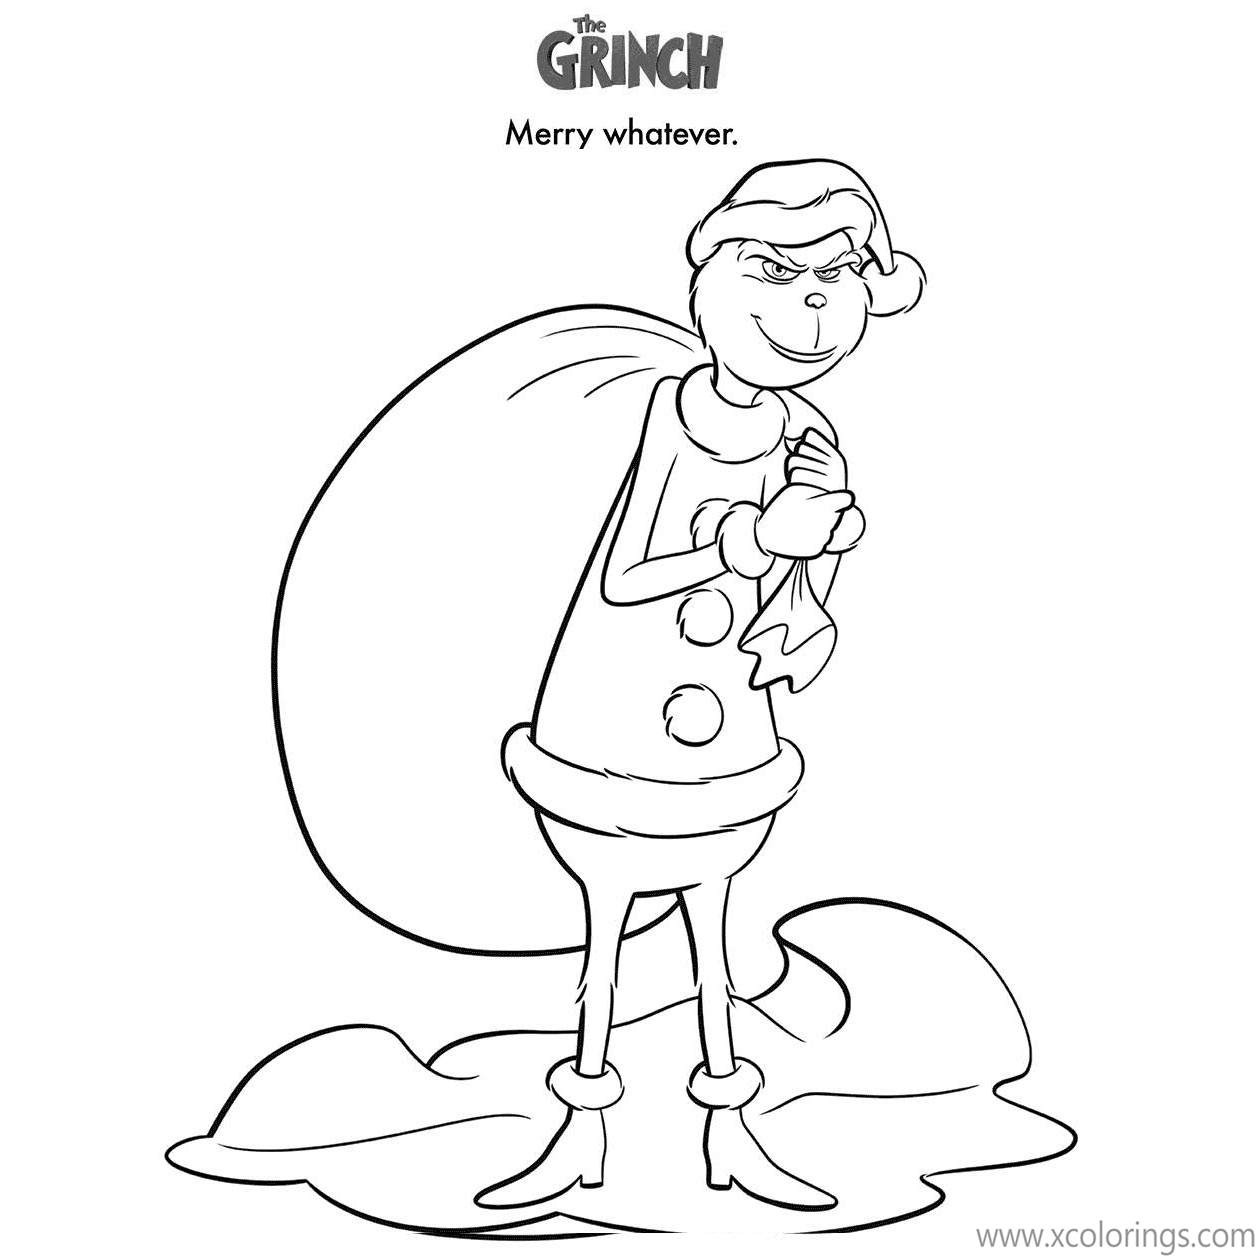 Free Grinch Coloring Pages Grinch with Bag printable